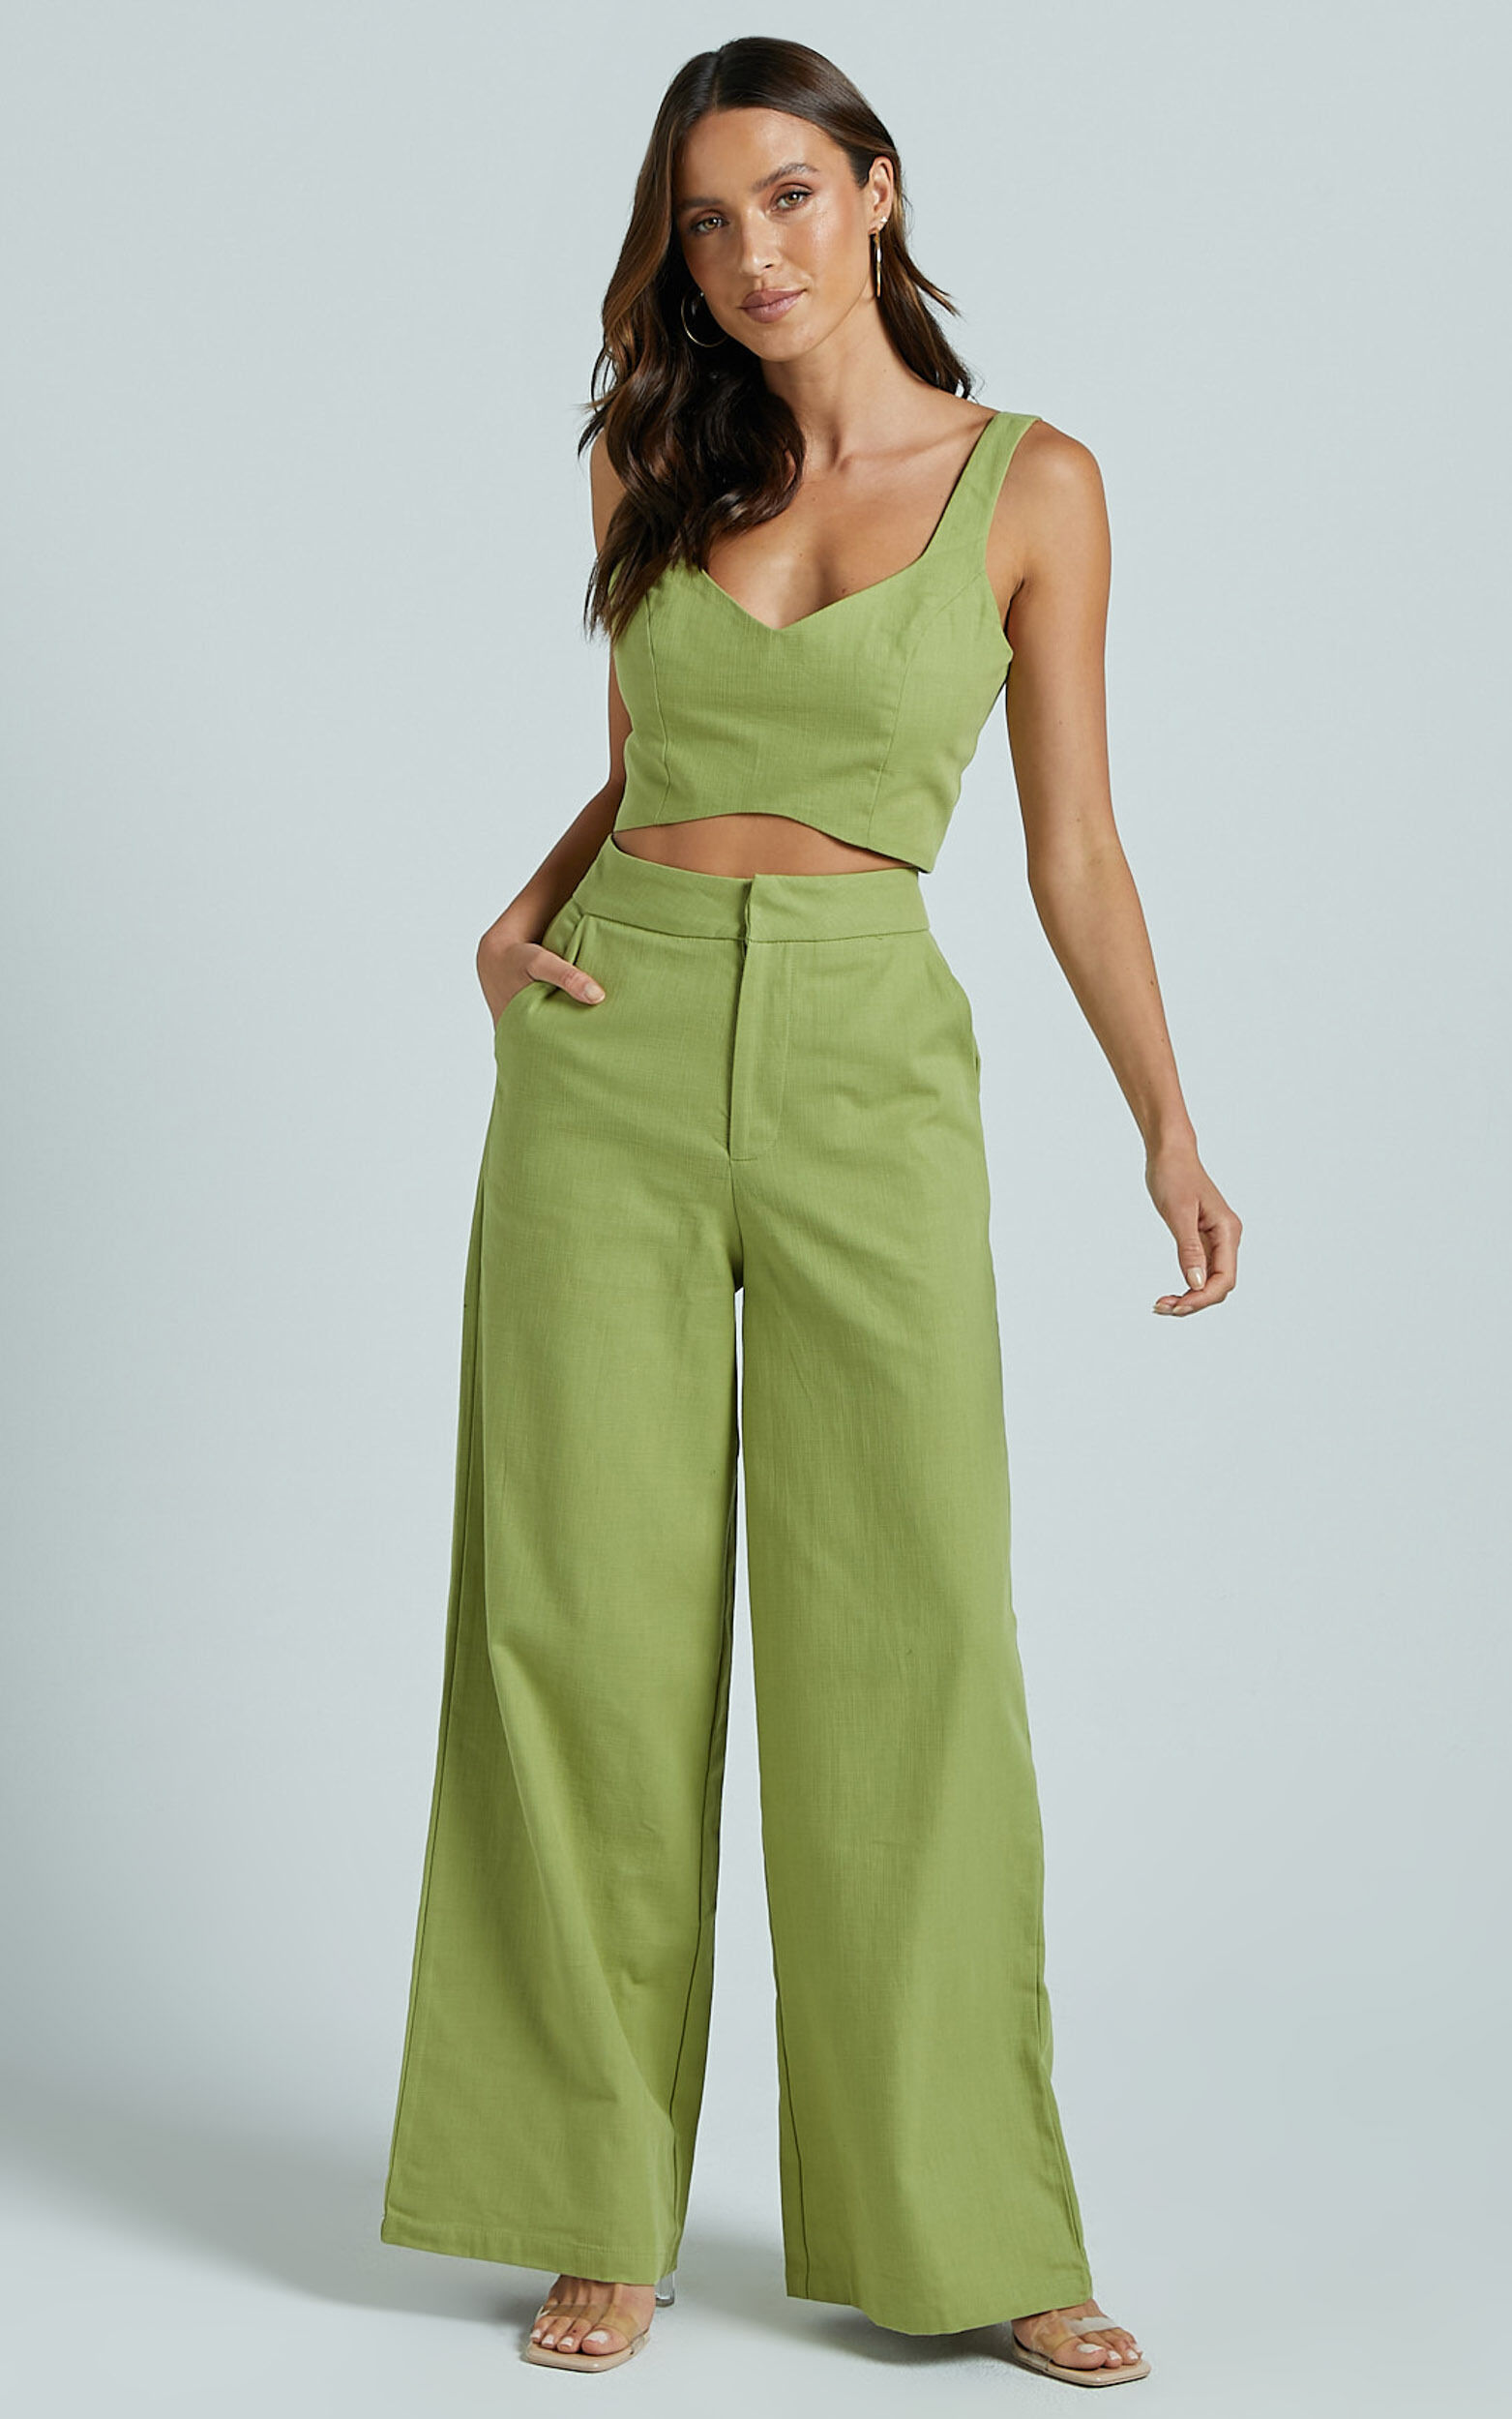 Kiky Two Piece Set - Curve Fitted Crop High Waisted Pant in Celery - 06, GRN1